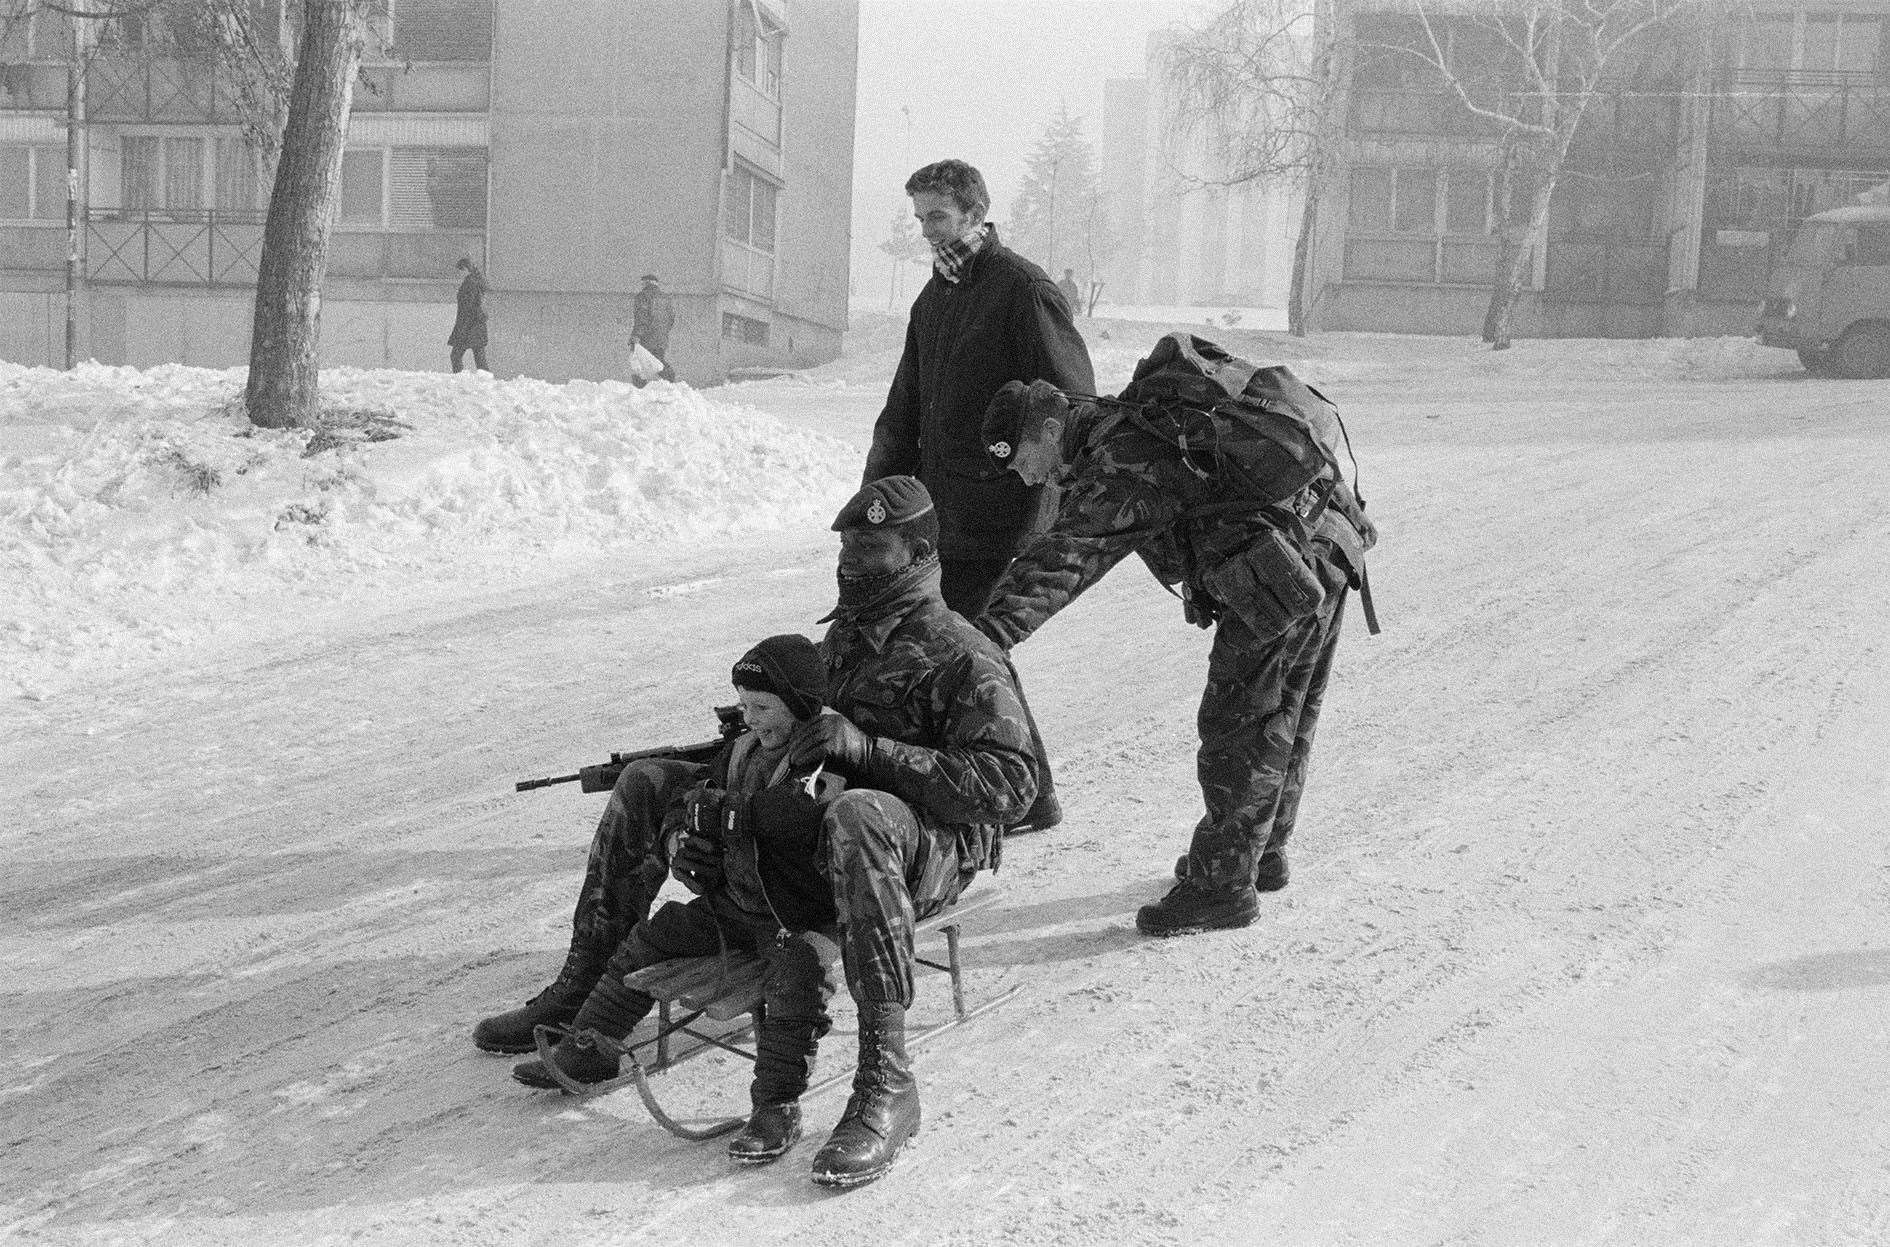 Kosovo image – soldier with boy on sled in snow. Picture: Nick Sidle